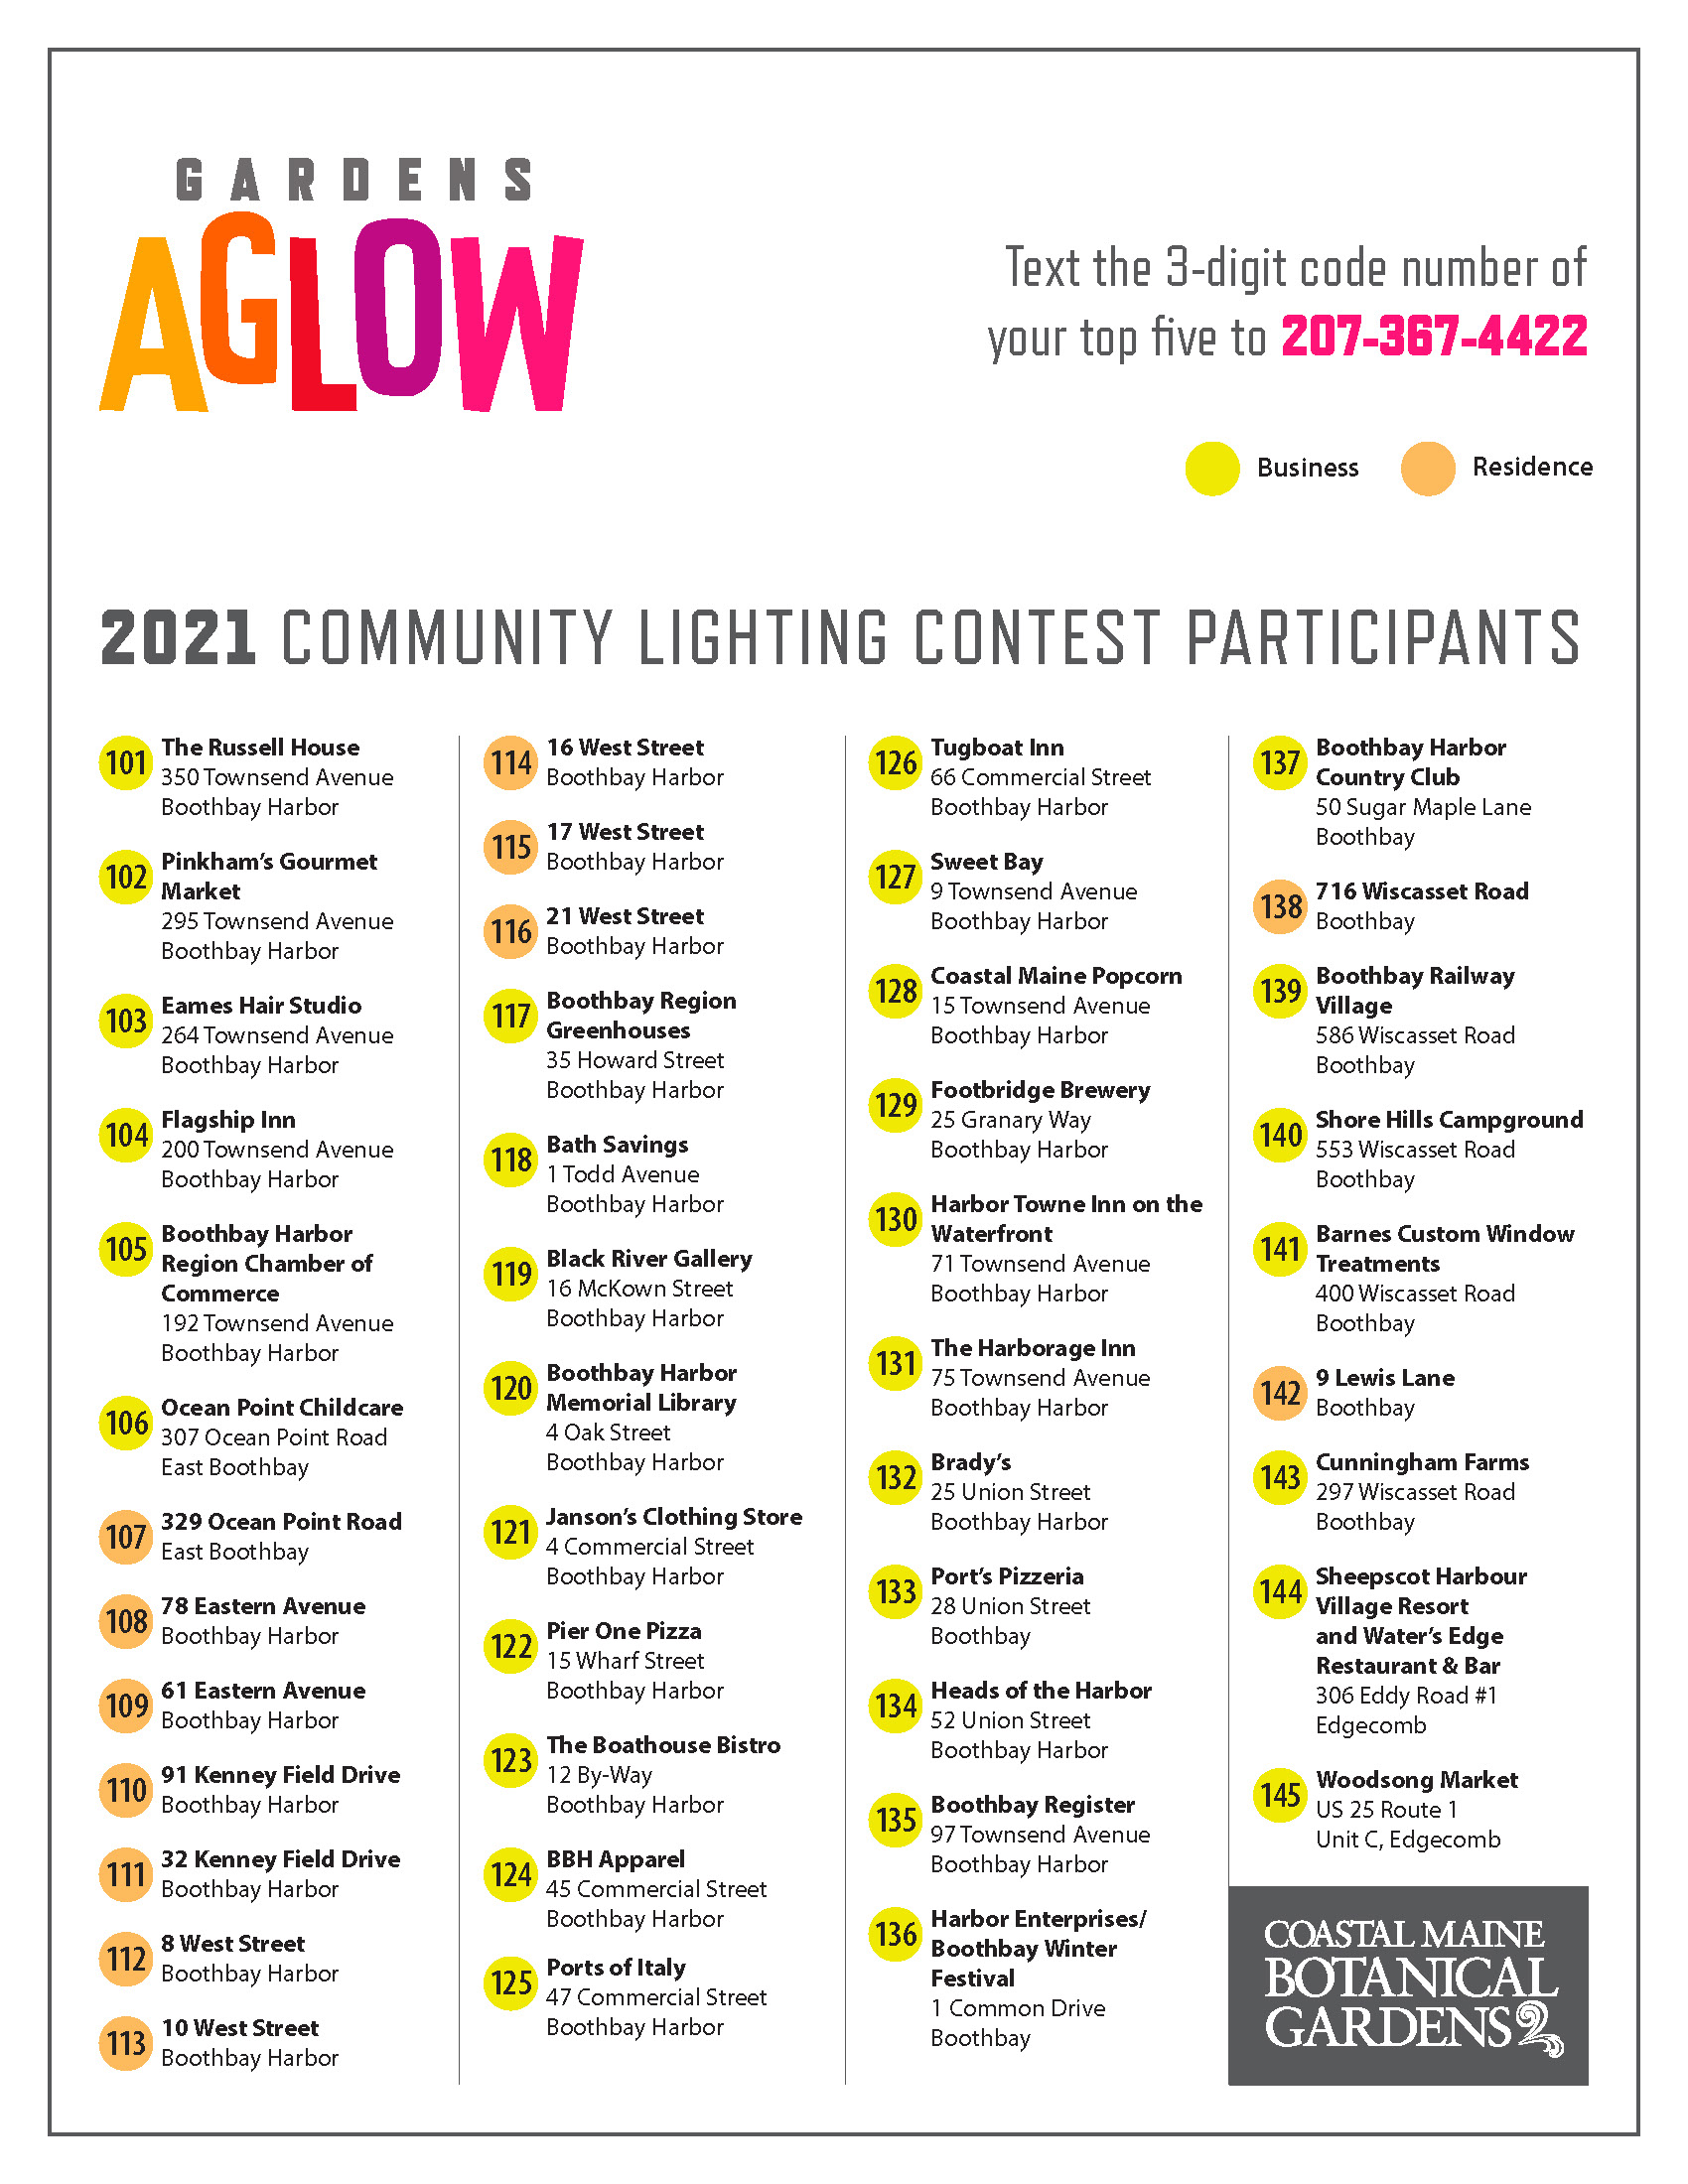 There are more than 50 Community Lighting Contest Participants.